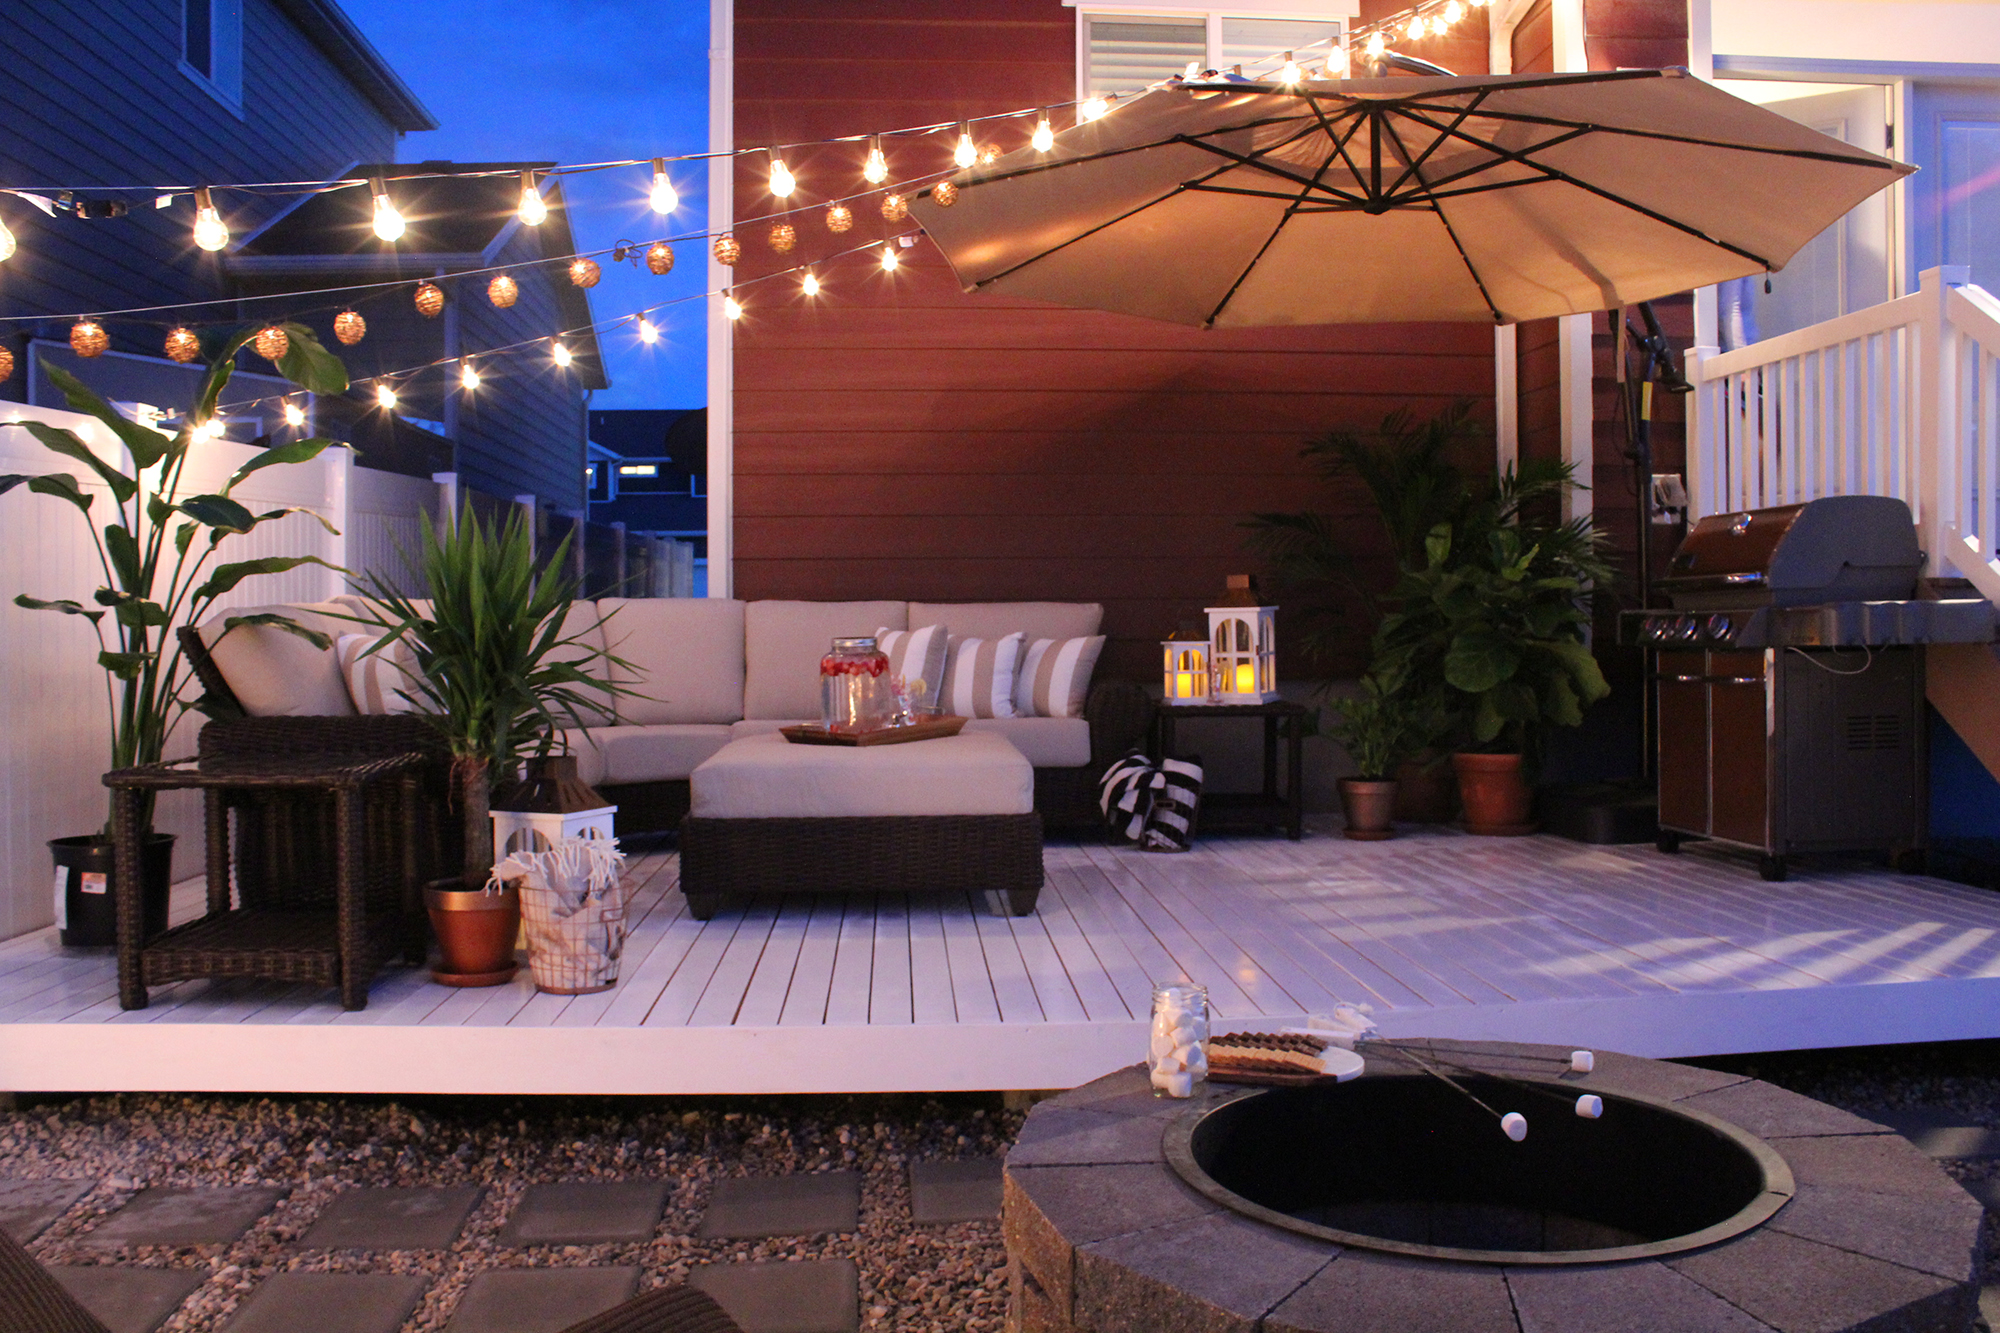 Patio set featuring string lights and LED andles